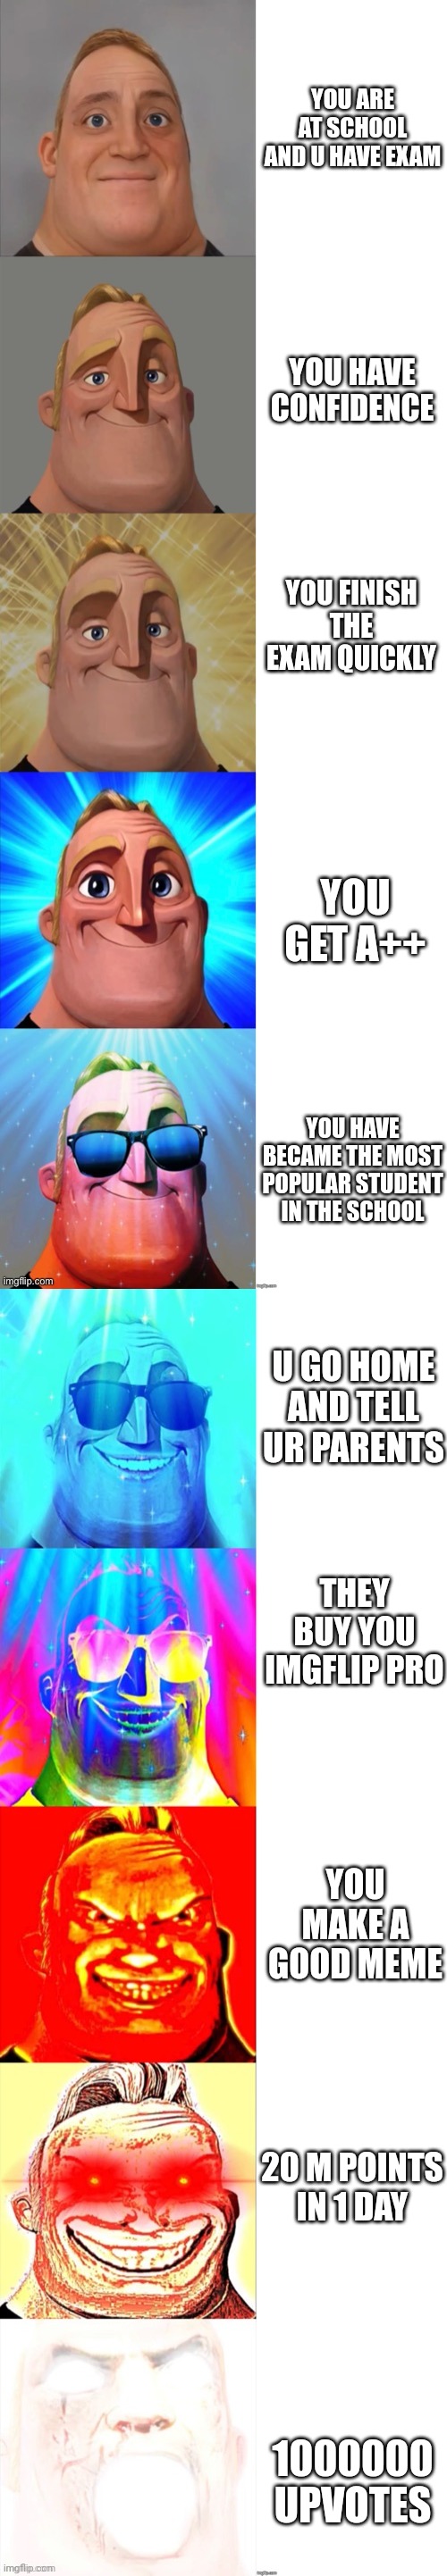 Mr Incredible Becoming Canny | YOU ARE AT SCHOOL AND U HAVE EXAM; YOU HAVE CONFIDENCE; YOU FINISH THE EXAM QUICKLY; YOU GET A++; YOU HAVE BECAME THE MOST POPULAR STUDENT IN THE SCHOOL; U GO HOME AND TELL UR PARENTS; THEY BUY YOU IMGFLIP PRO; YOU MAKE A GOOD MEME; 20 M POINTS IN 1 DAY; 1000000 UPVOTES | image tagged in mr incredible becoming canny | made w/ Imgflip meme maker